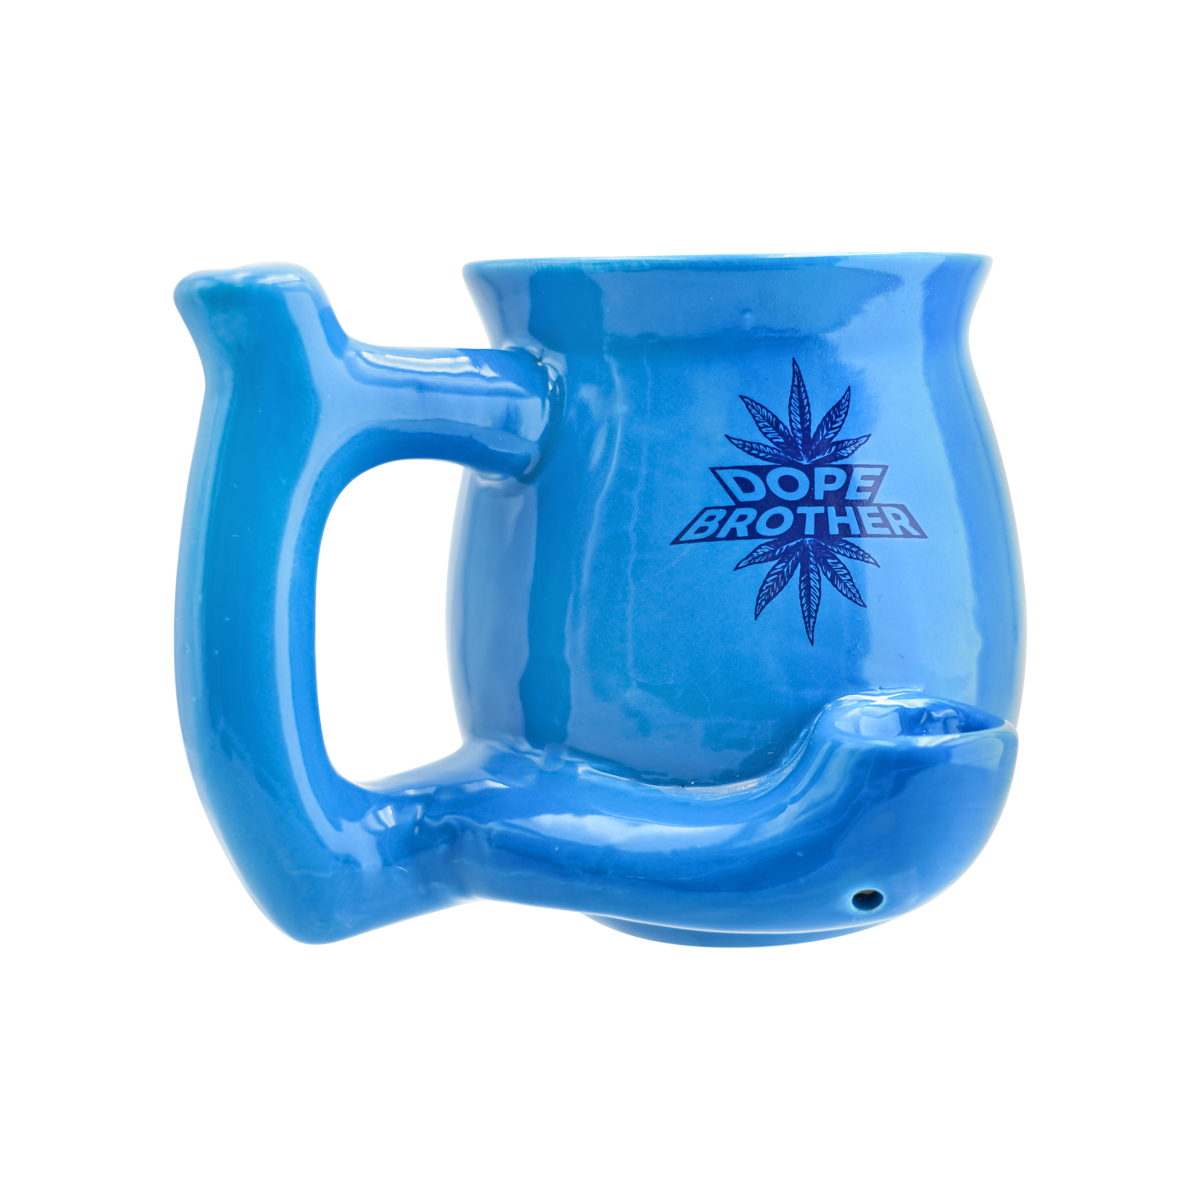 &quot;Dope Brother&quot; Mug Pipe